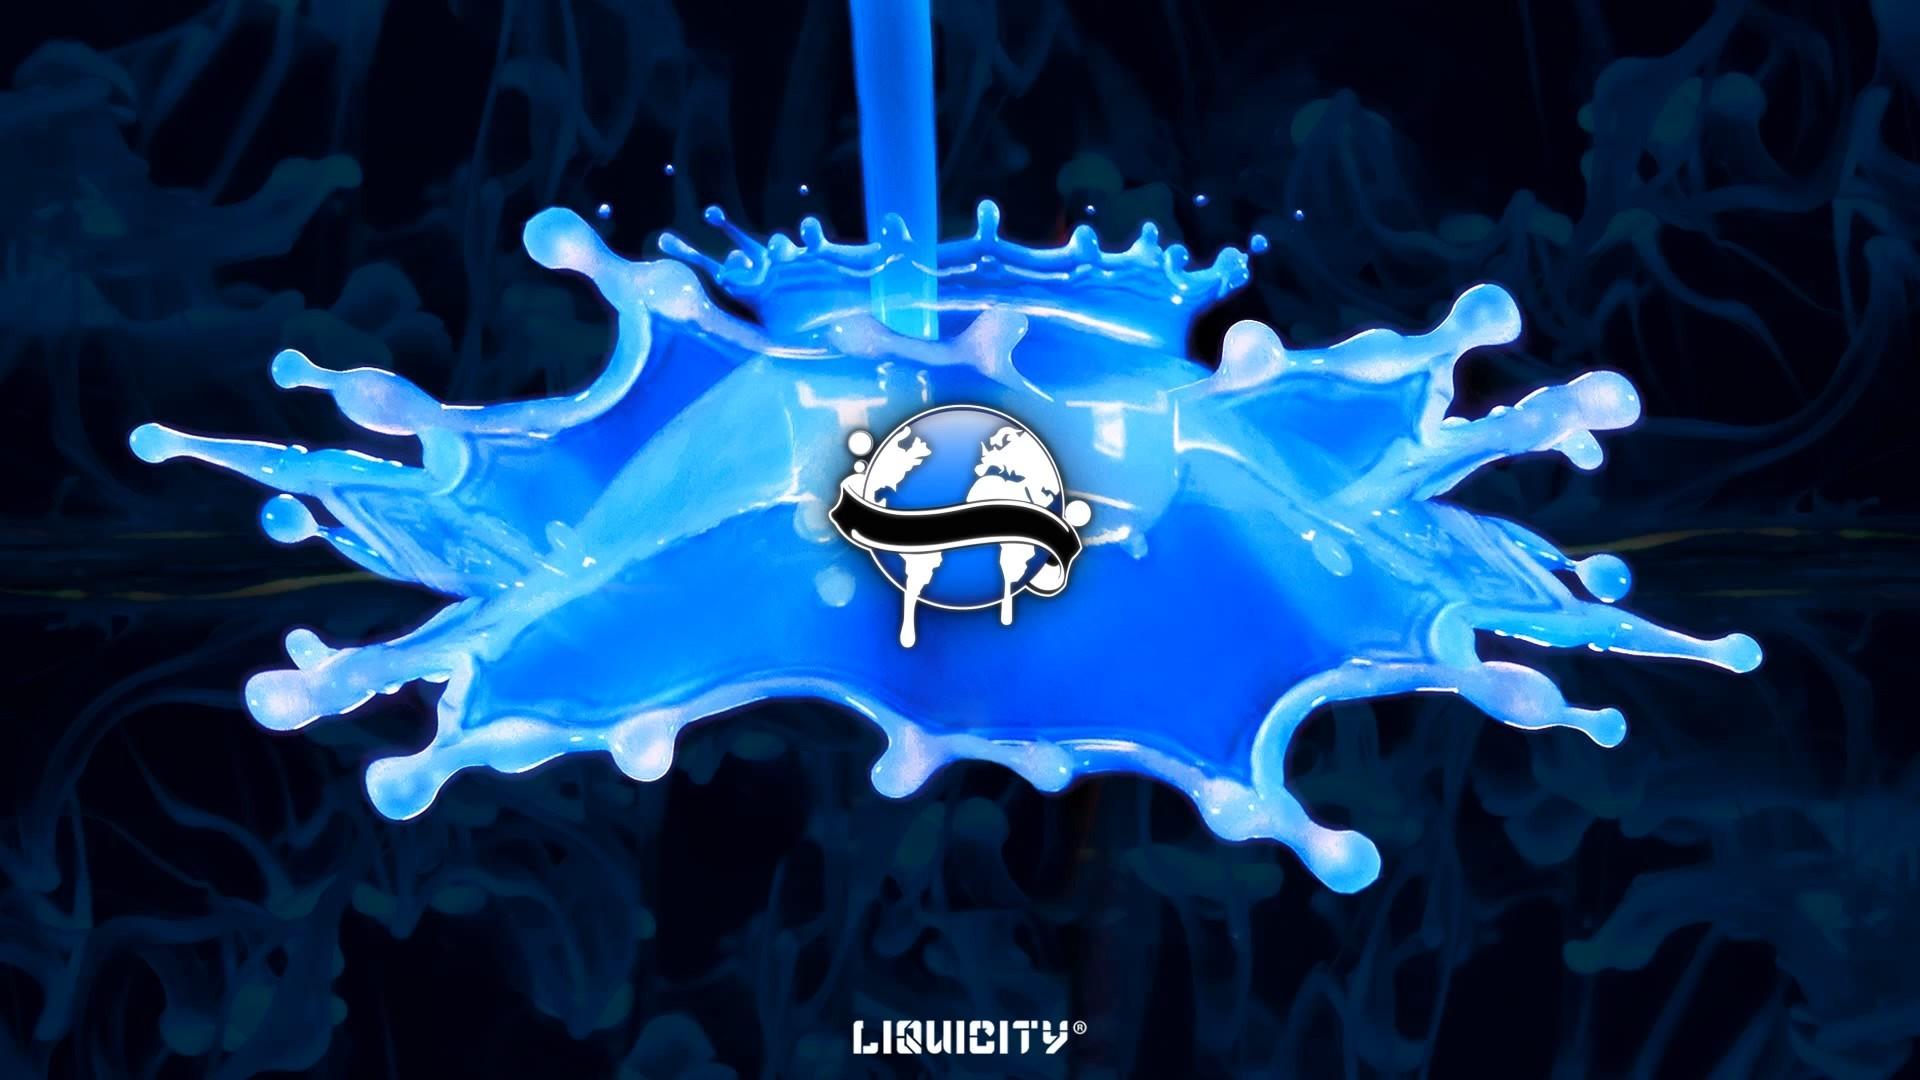 Abstract drum and bass liquicity wallpaper